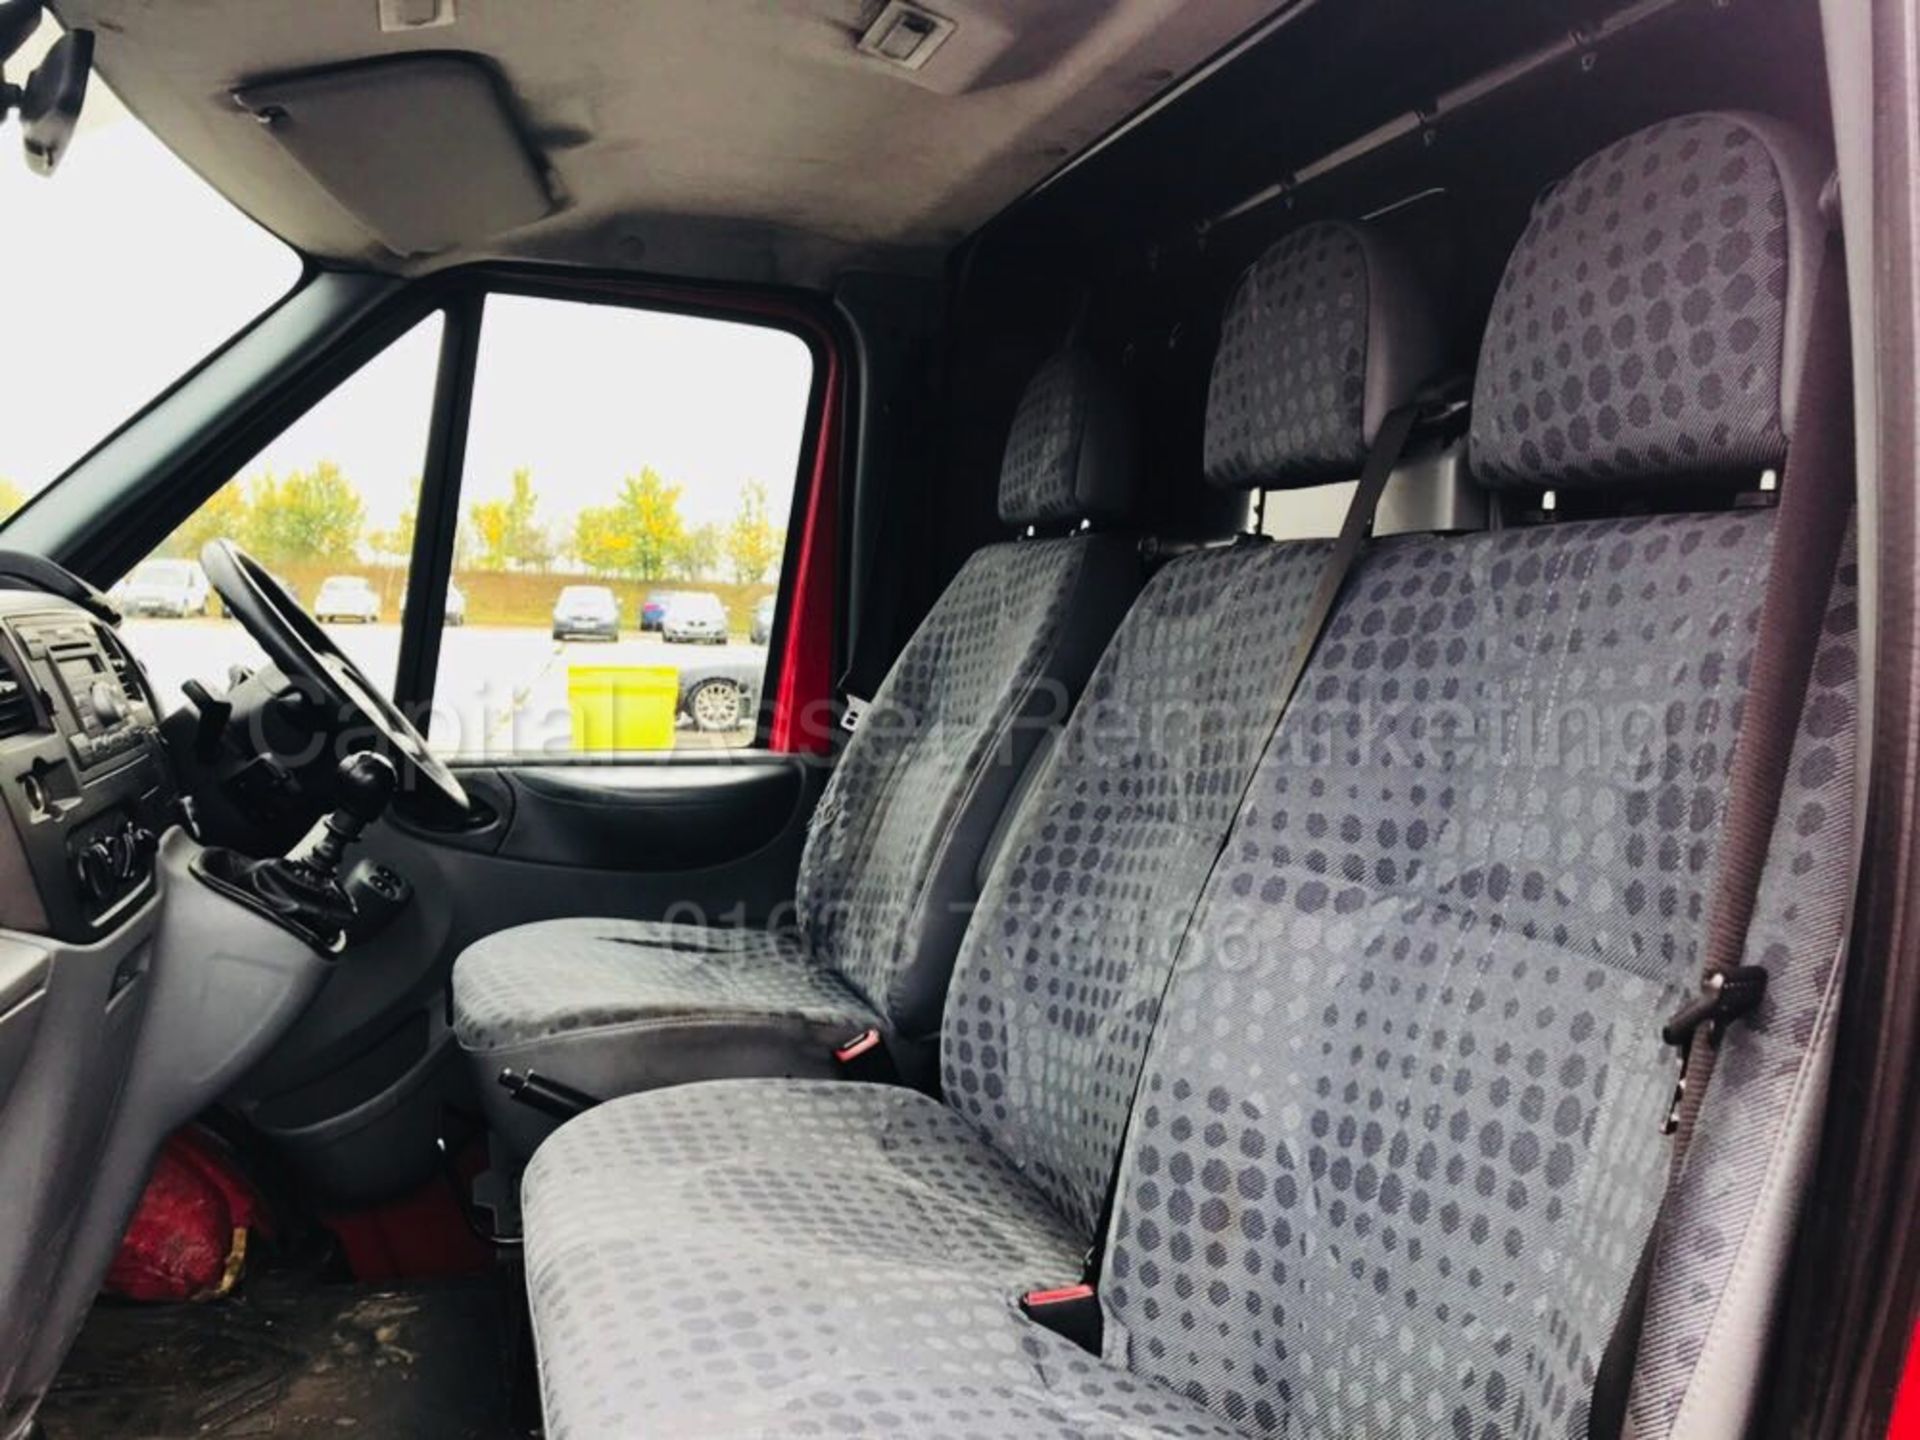 FORD TRANSIT T350L E/F 'XLWB HI-ROOF' (2009 MODEL) '2.4 TDCI - 115 PS - 6 SPEED' **AIR CON** - Image 13 of 30